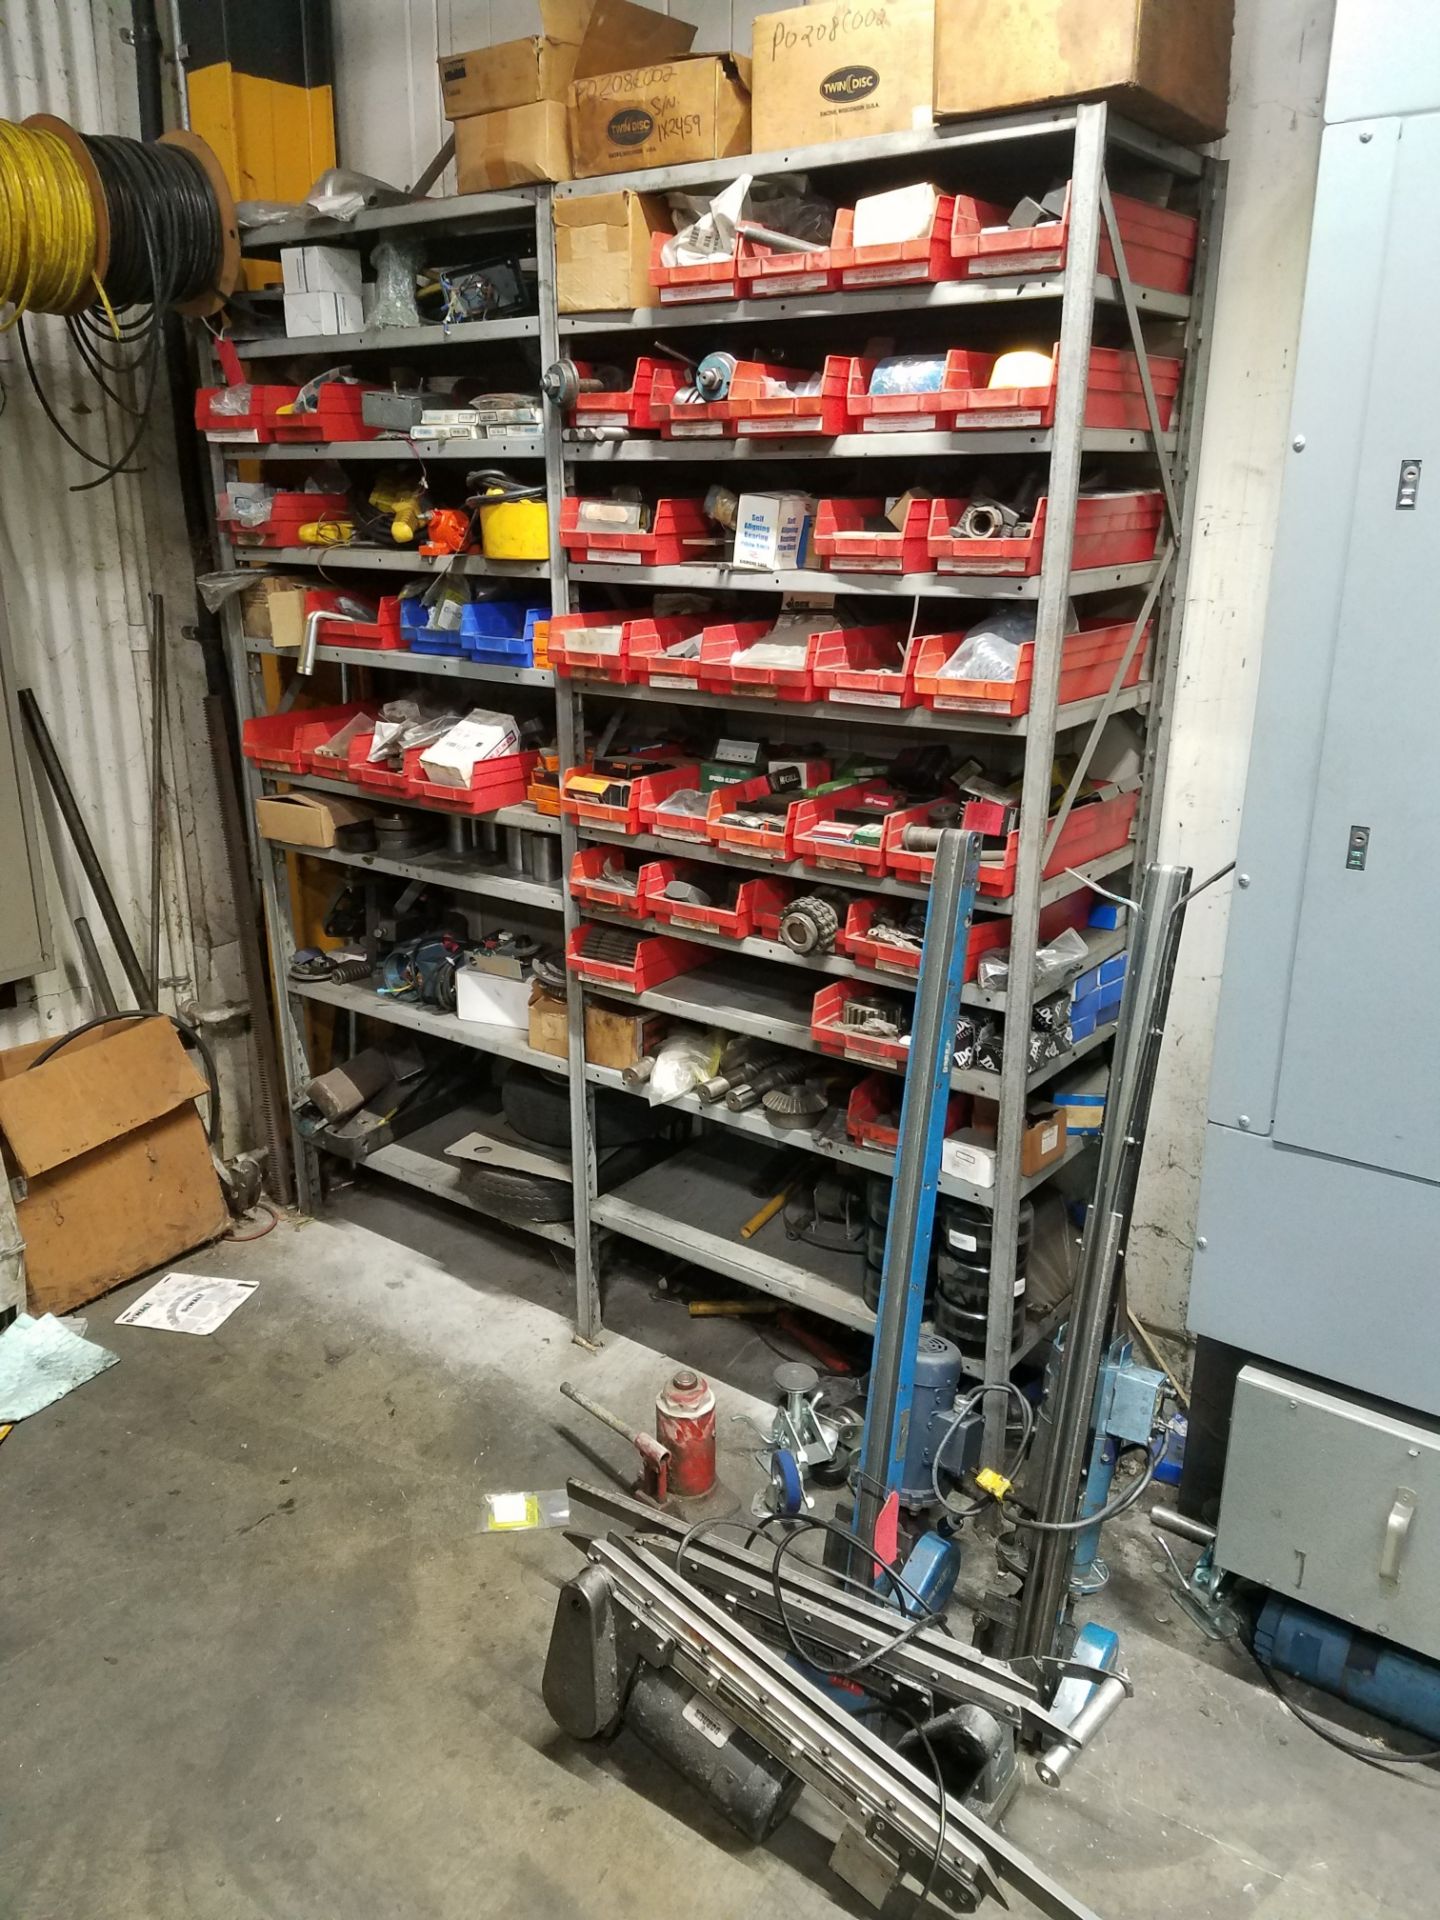 (LOT) REMAINING CONTENTS OF MAINTENANCE ROOM INCLUDING MOTORS, ELECTRICAL, MACHINE PARTS, VALVES, - Image 8 of 9